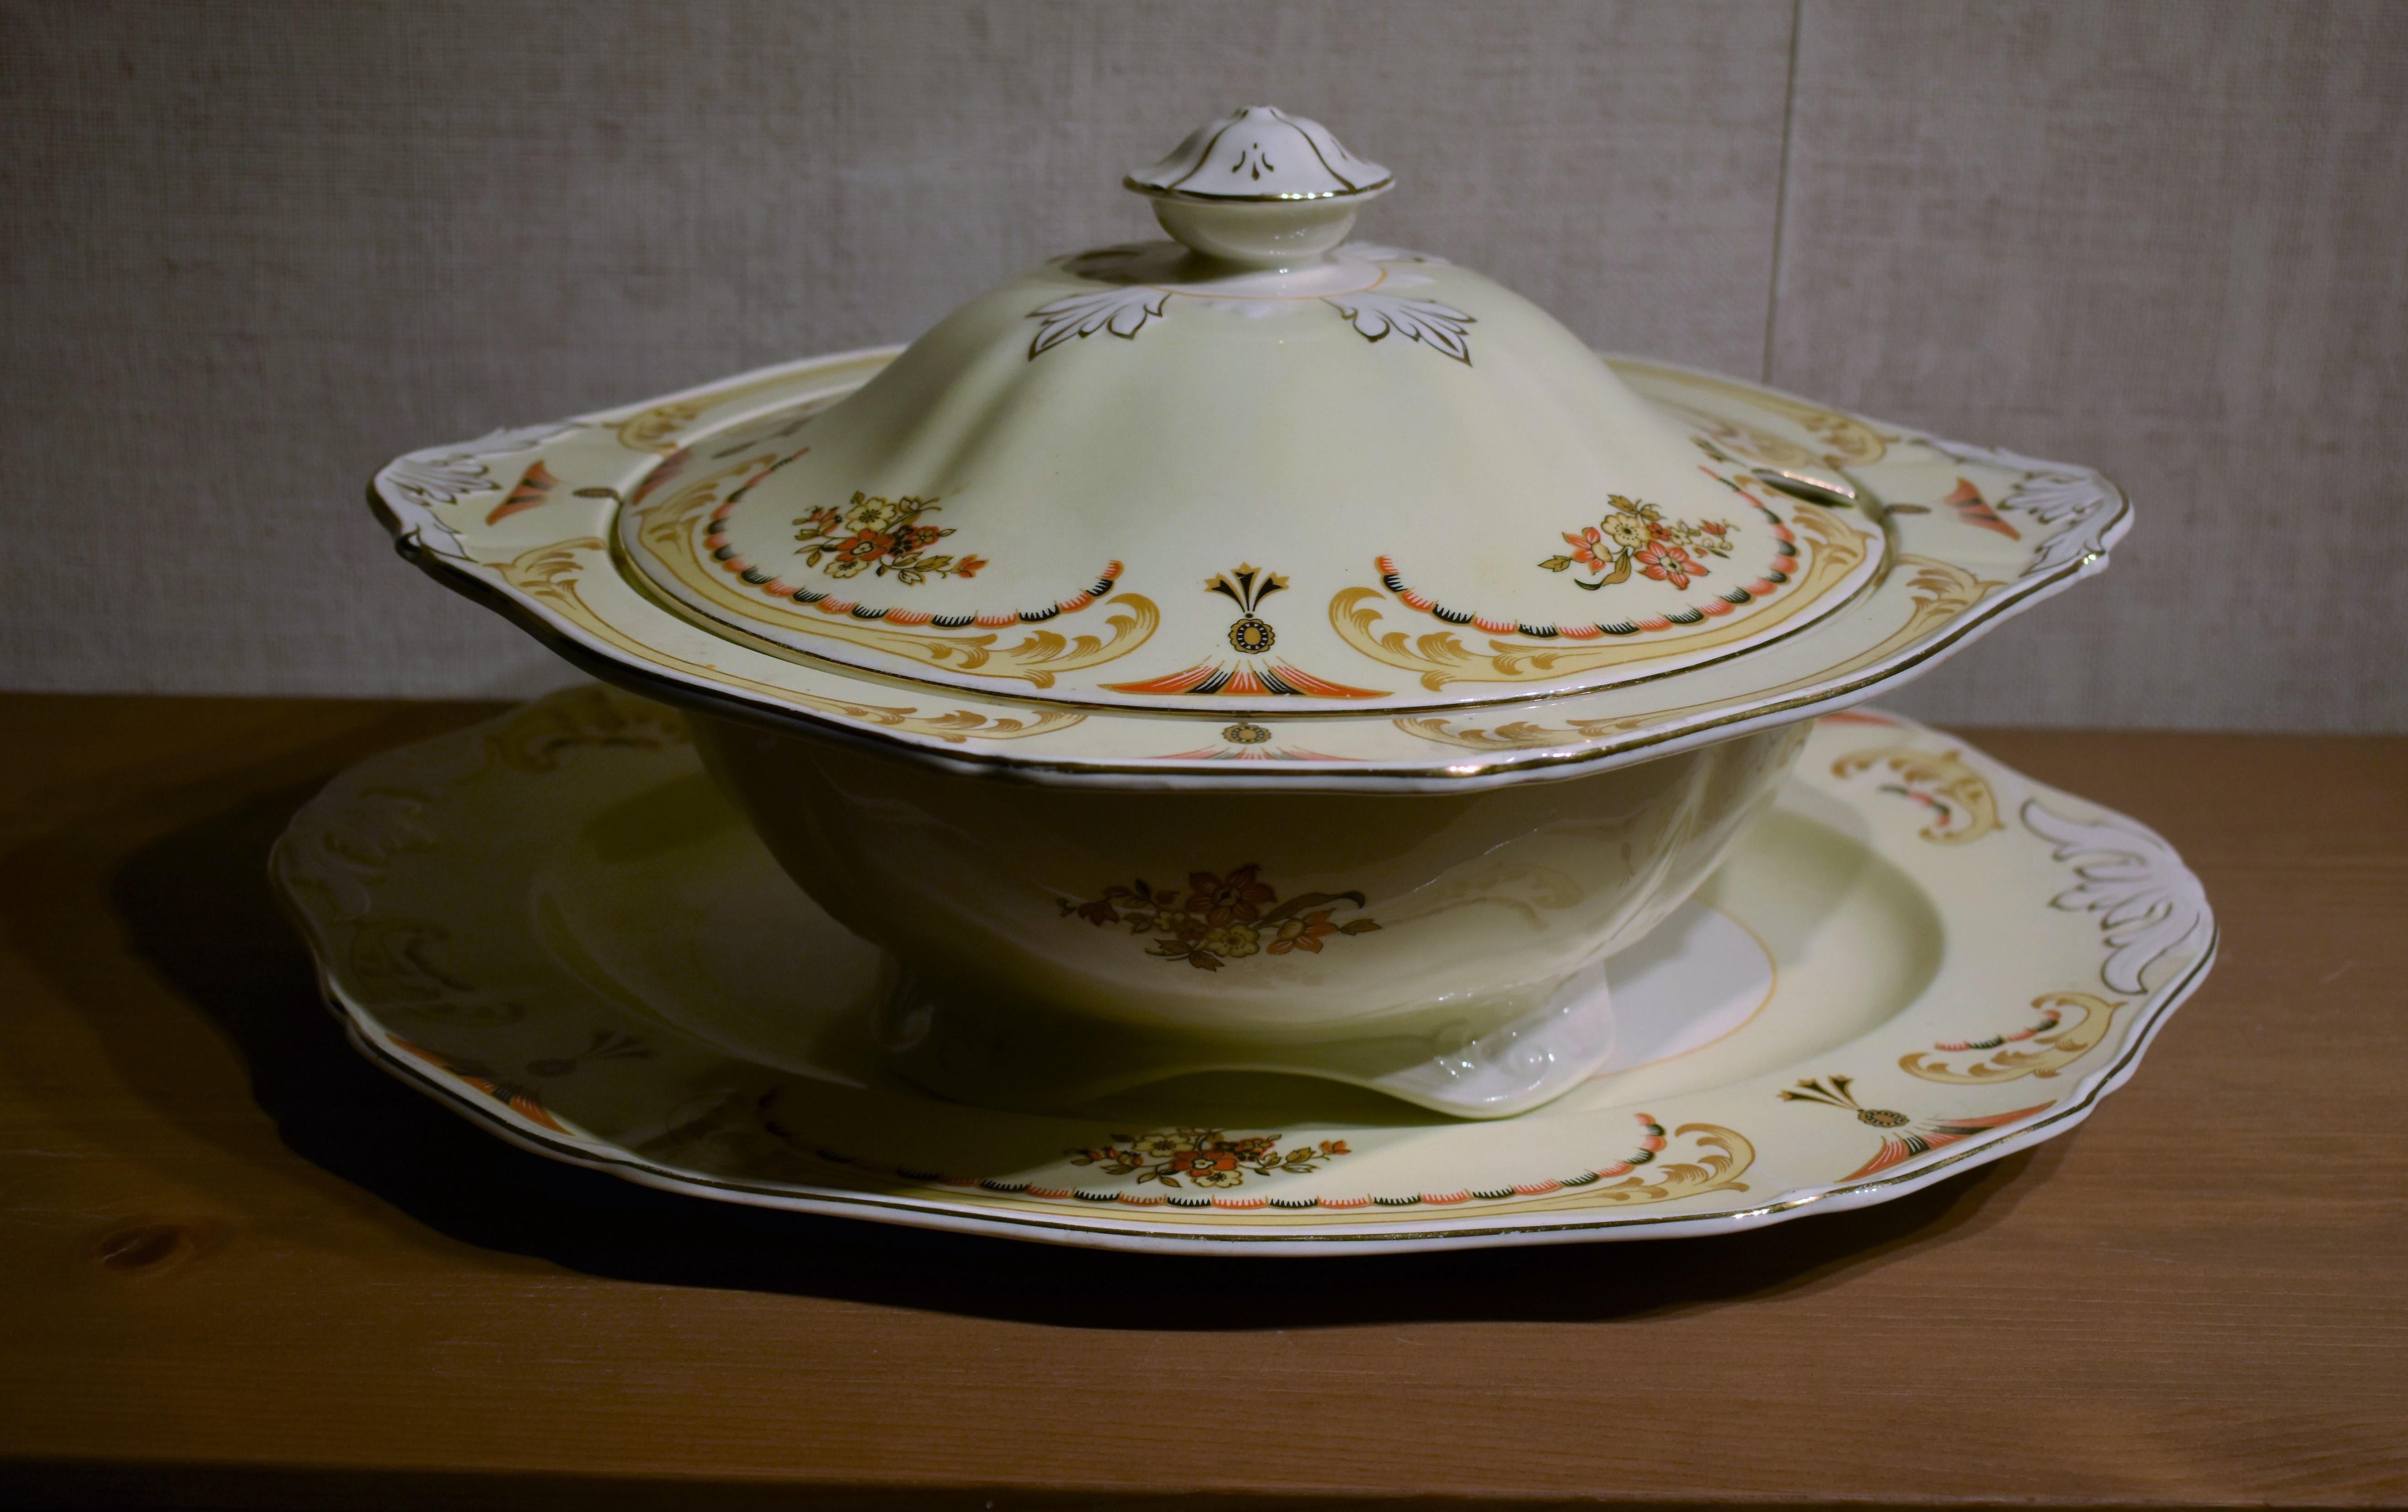 A lovely large serving bowl with lid and serving plate. The set is in pristine condition and has a beautiful shape.